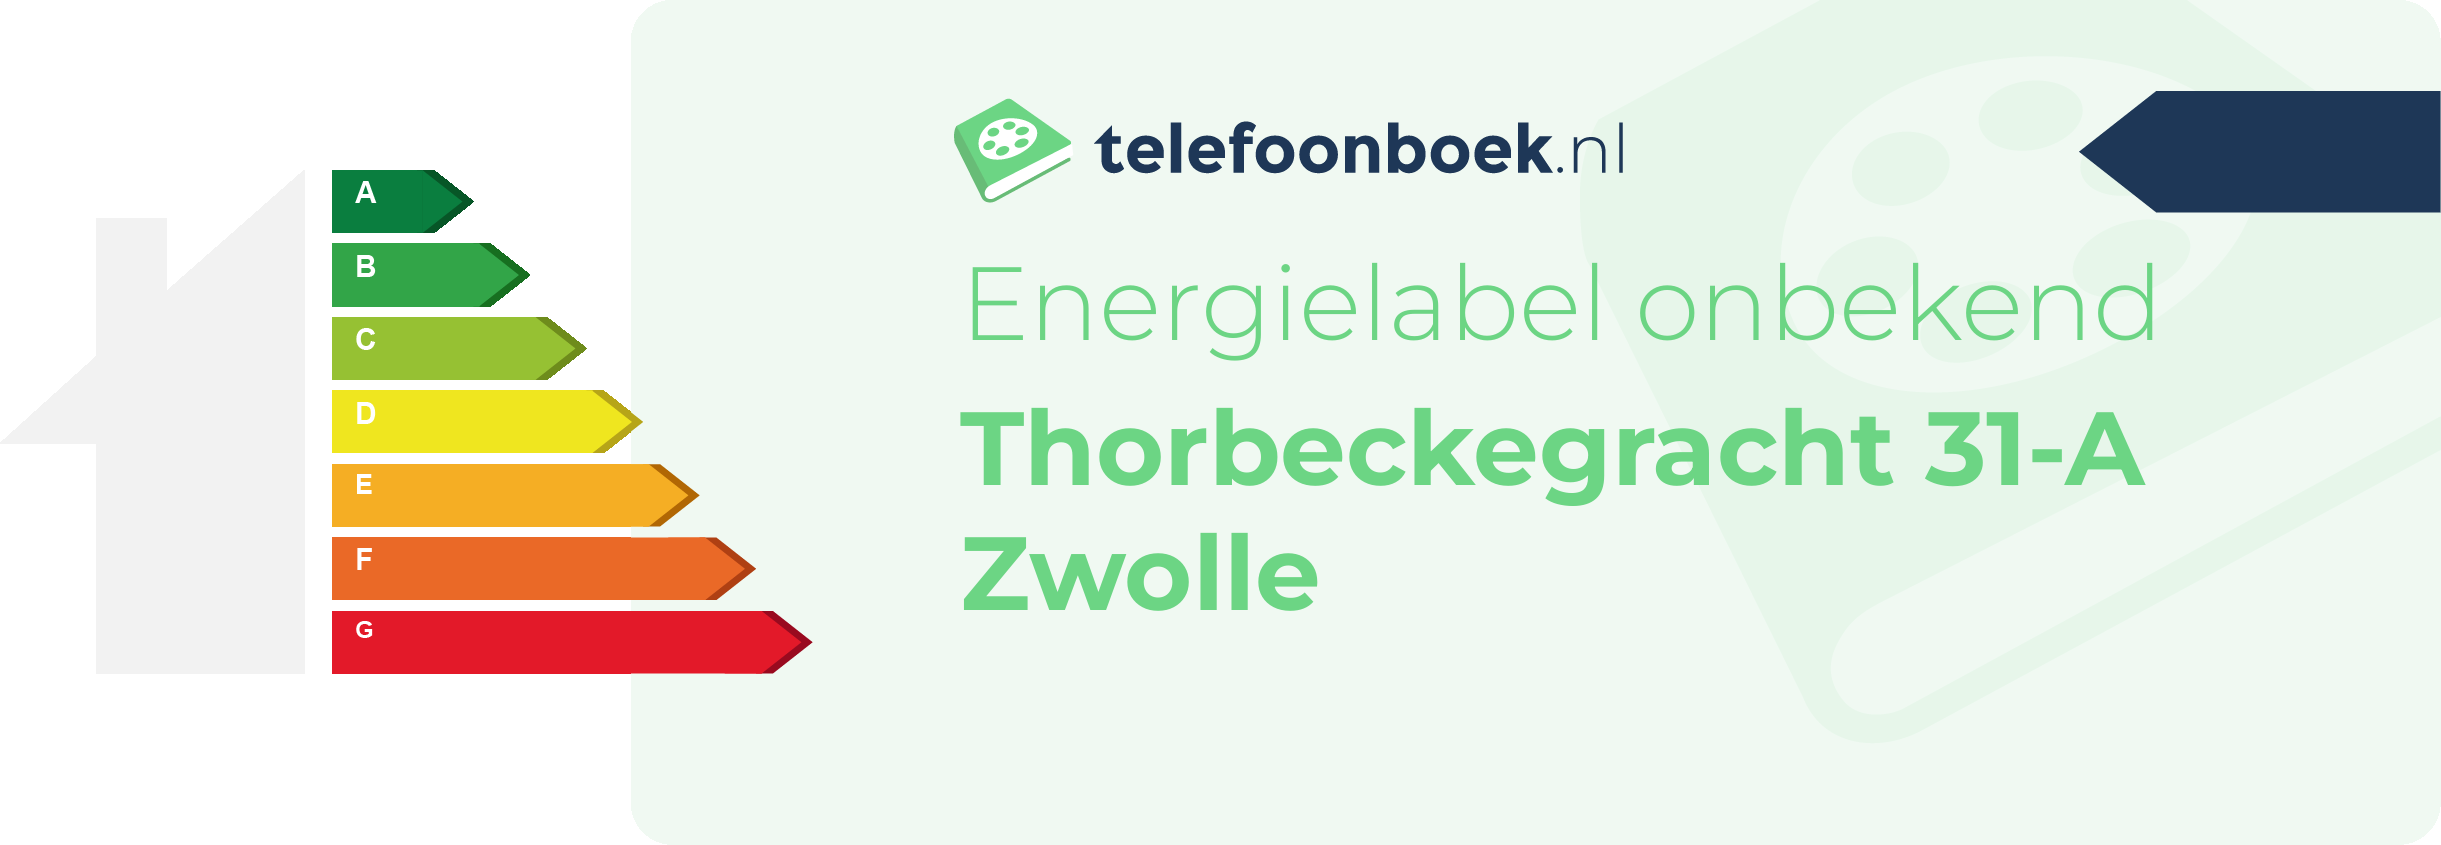 Energielabel Thorbeckegracht 31-A Zwolle